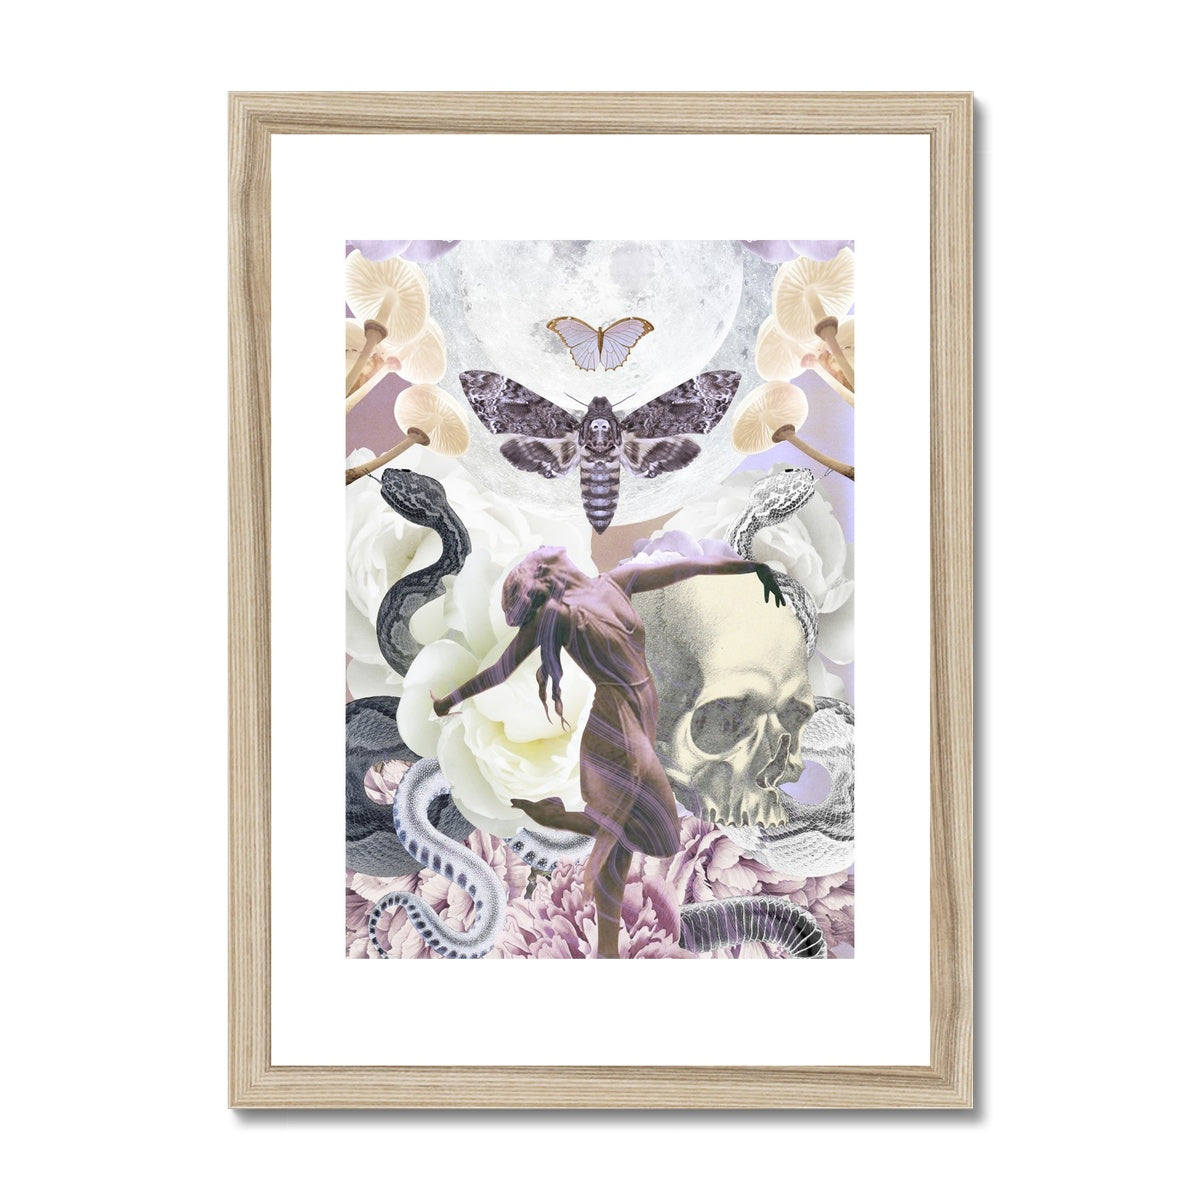 Transformation Framed & Mounted Print - Starseed Designs Inc.